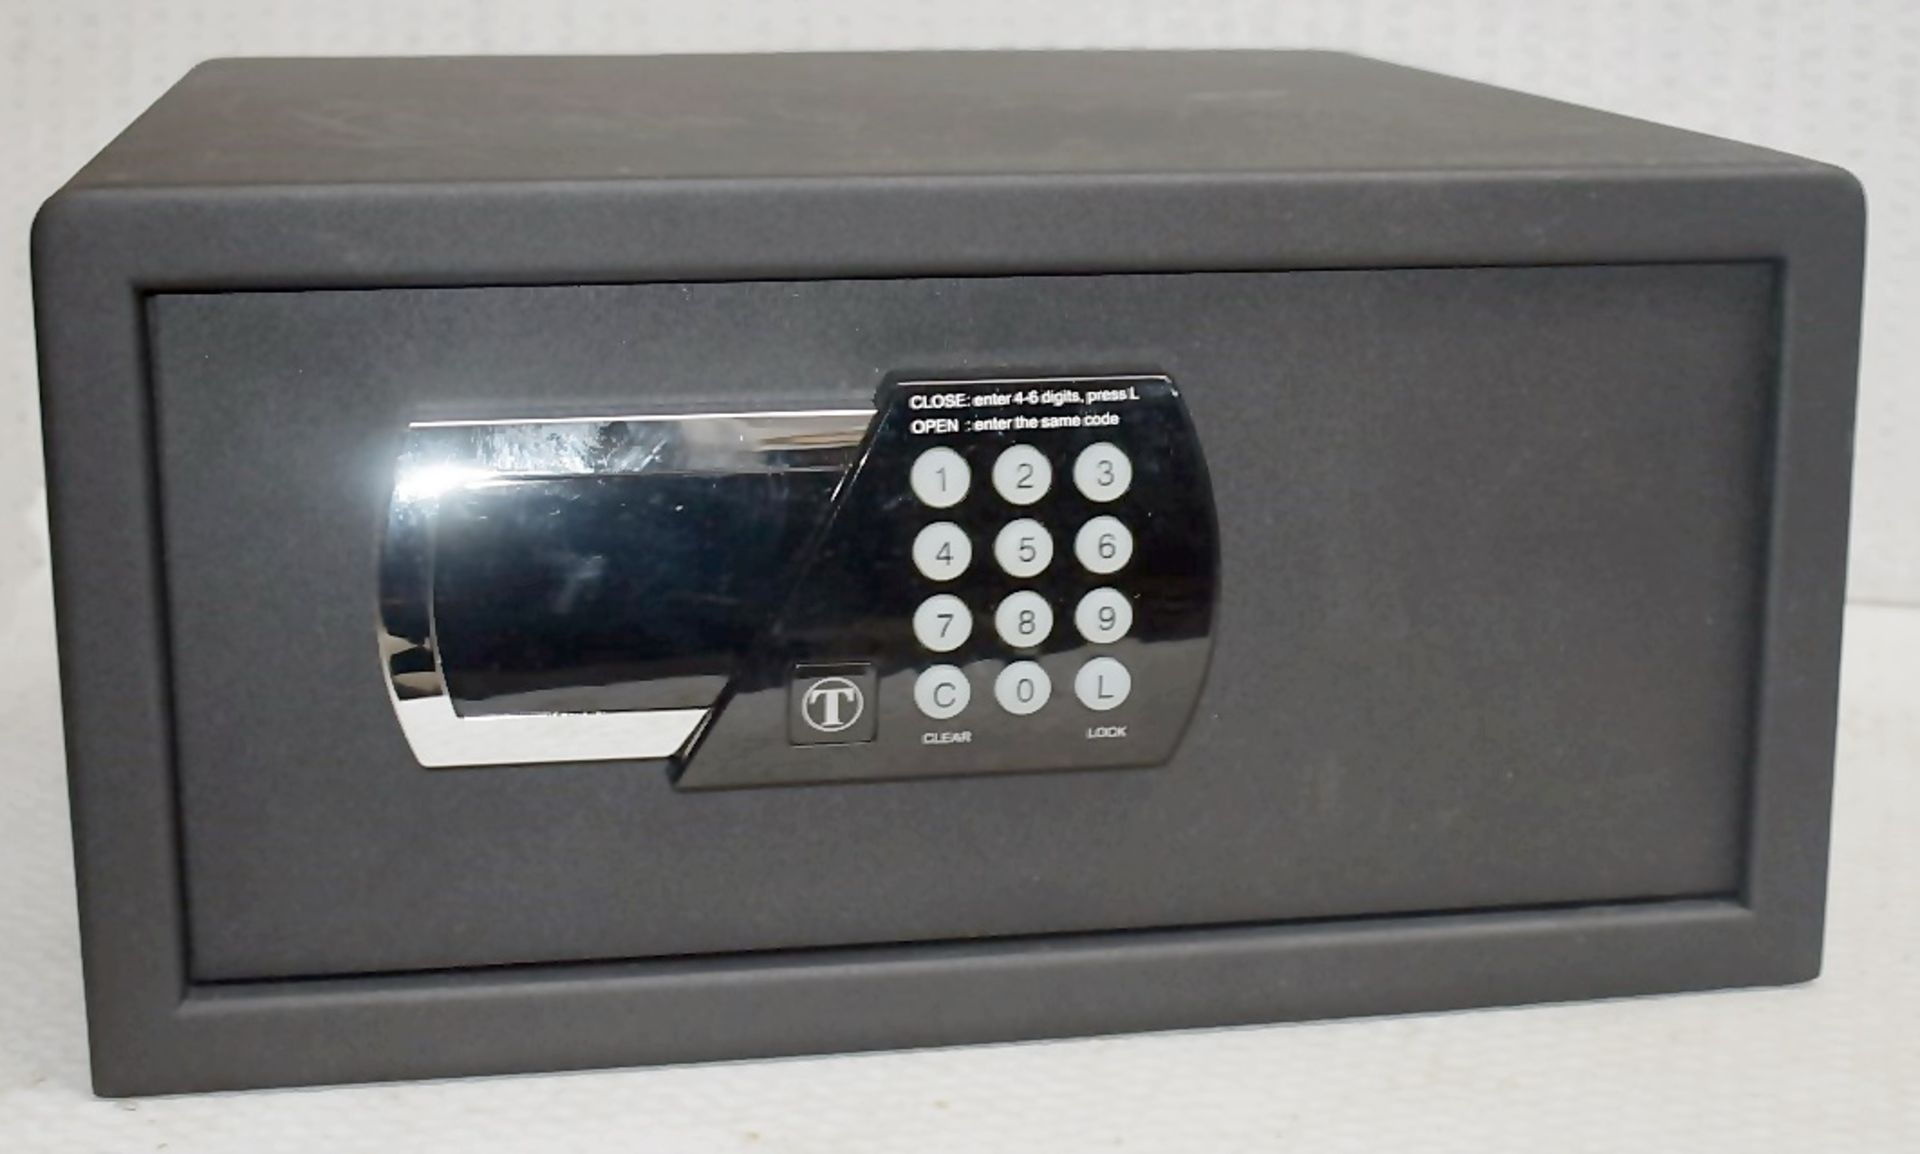 1 x Countertop Safe / Safety Deposit Box With Keypad - Ref: DS7596 ALT WH2 - CL816 - Location: - Image 3 of 3